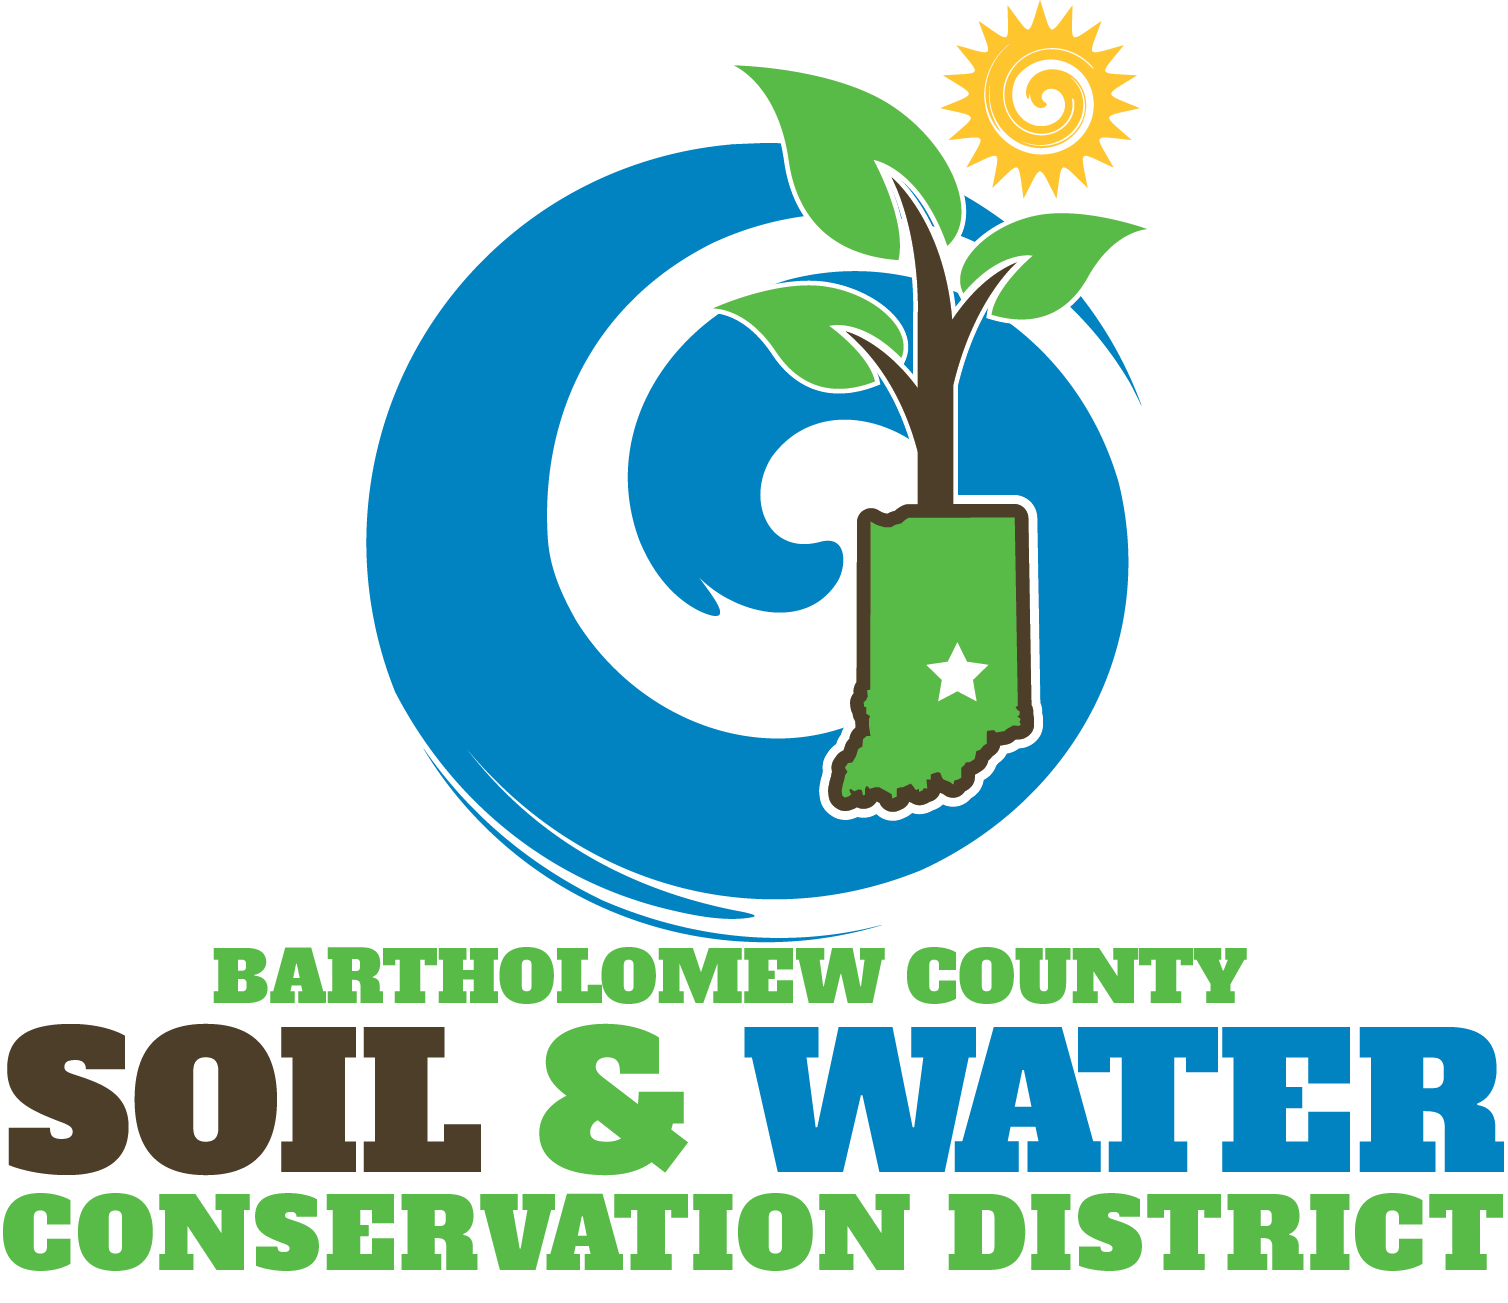 Bartholomew County Soil and Water Conservation District